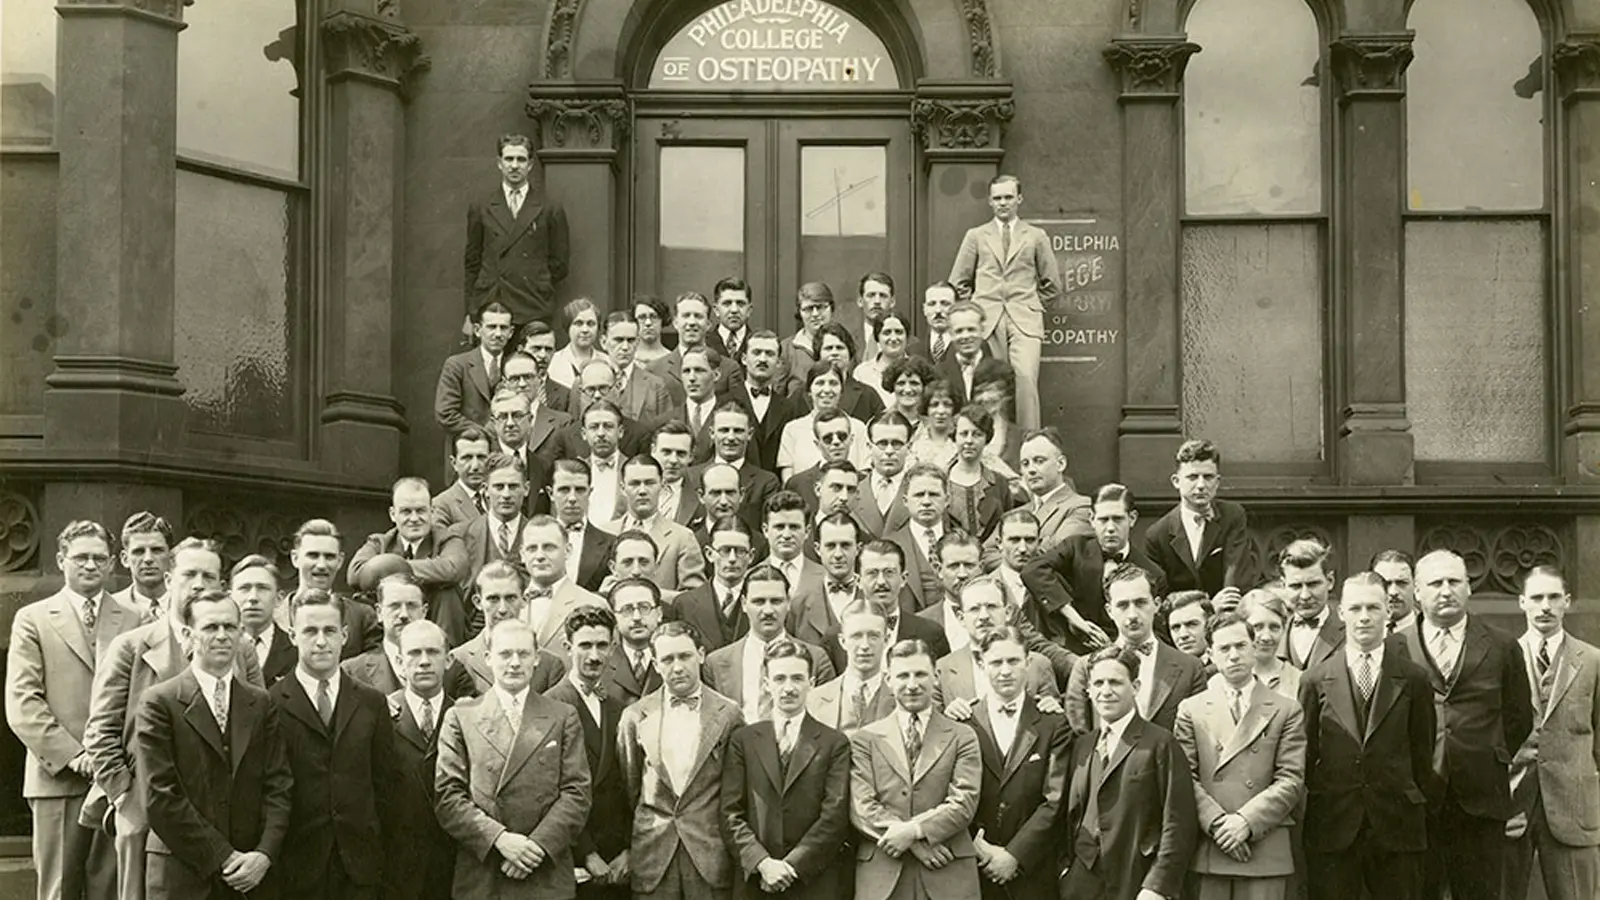 The PCOM Class of 1927 pose in front of a Philadelphia college building